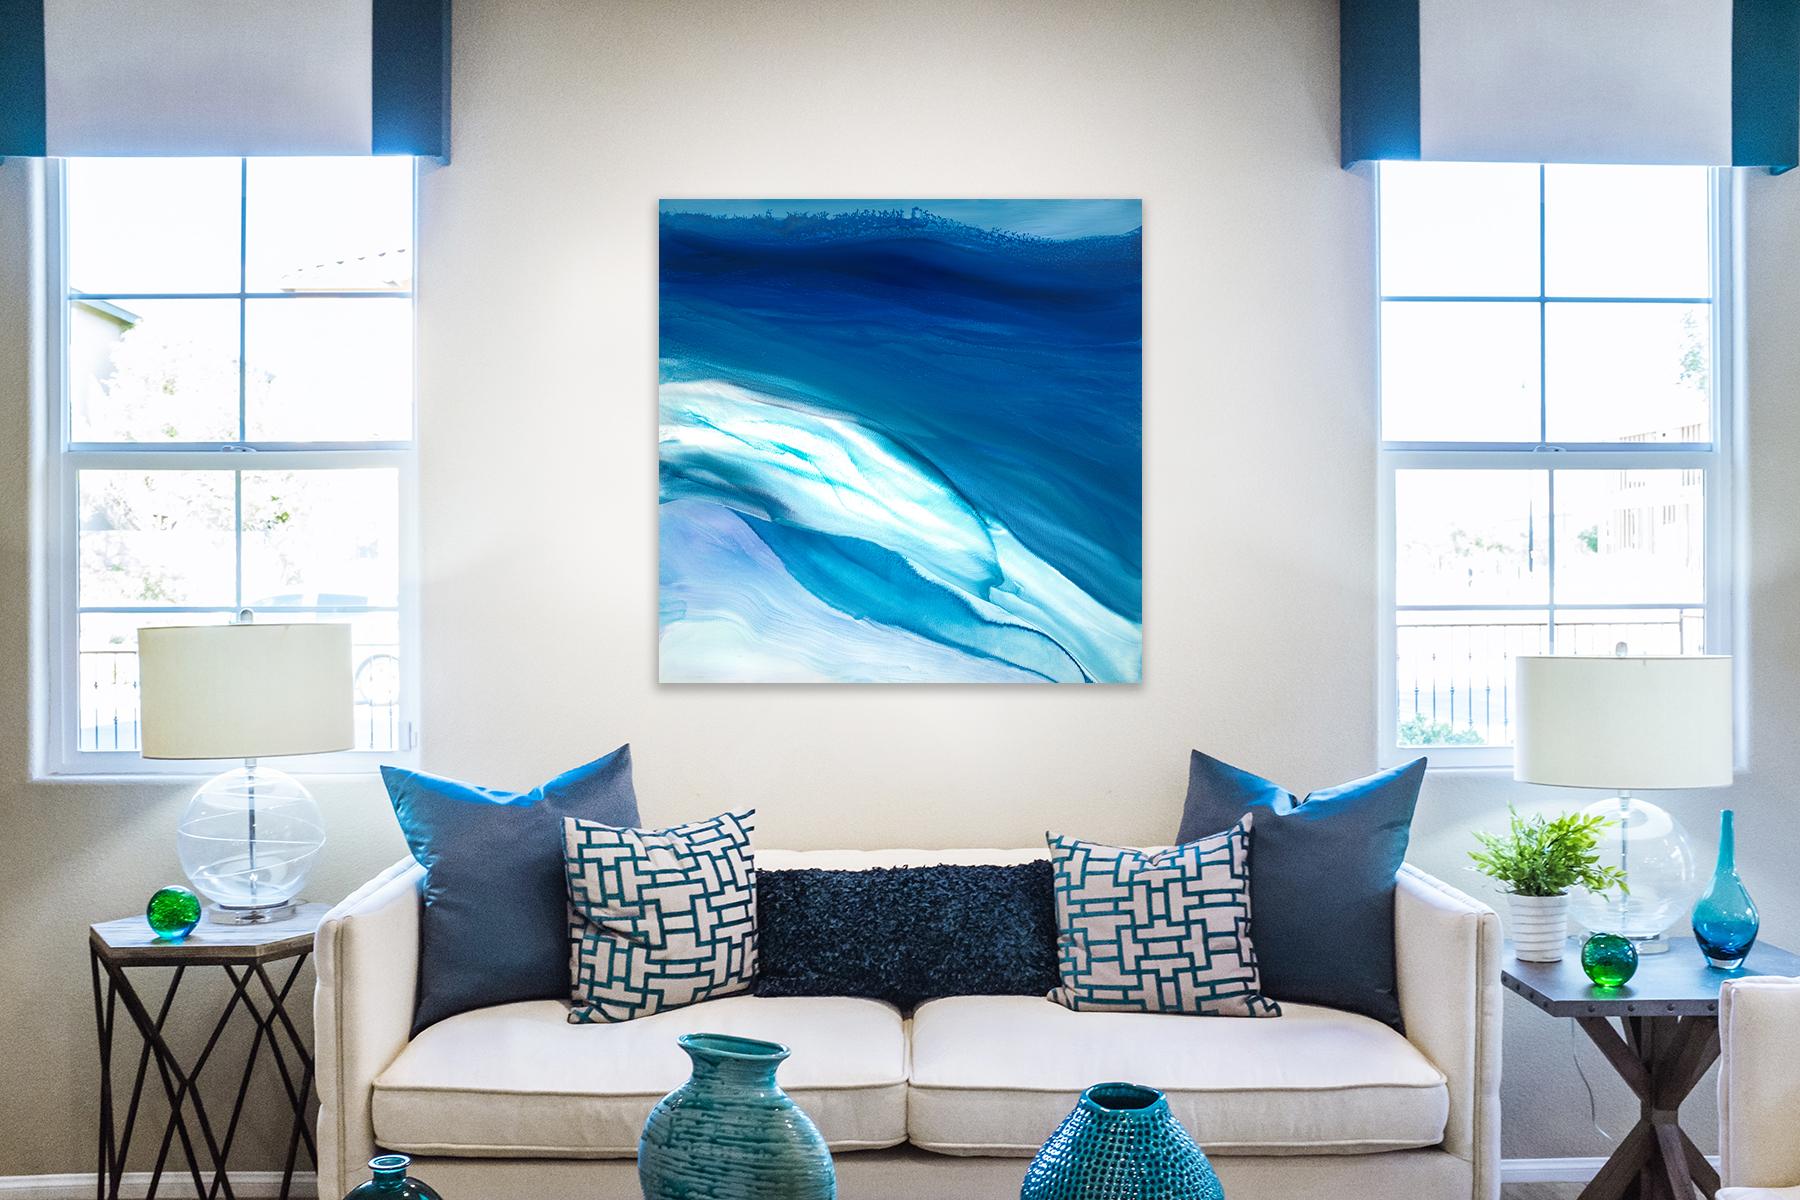 This abstract coastal painting by Teodora Guererra features a cool blue, teal, and turquoise palette. The artist applies washes of color that blend together to create an abstract composition with coastal elements. The painting is wired and ready to